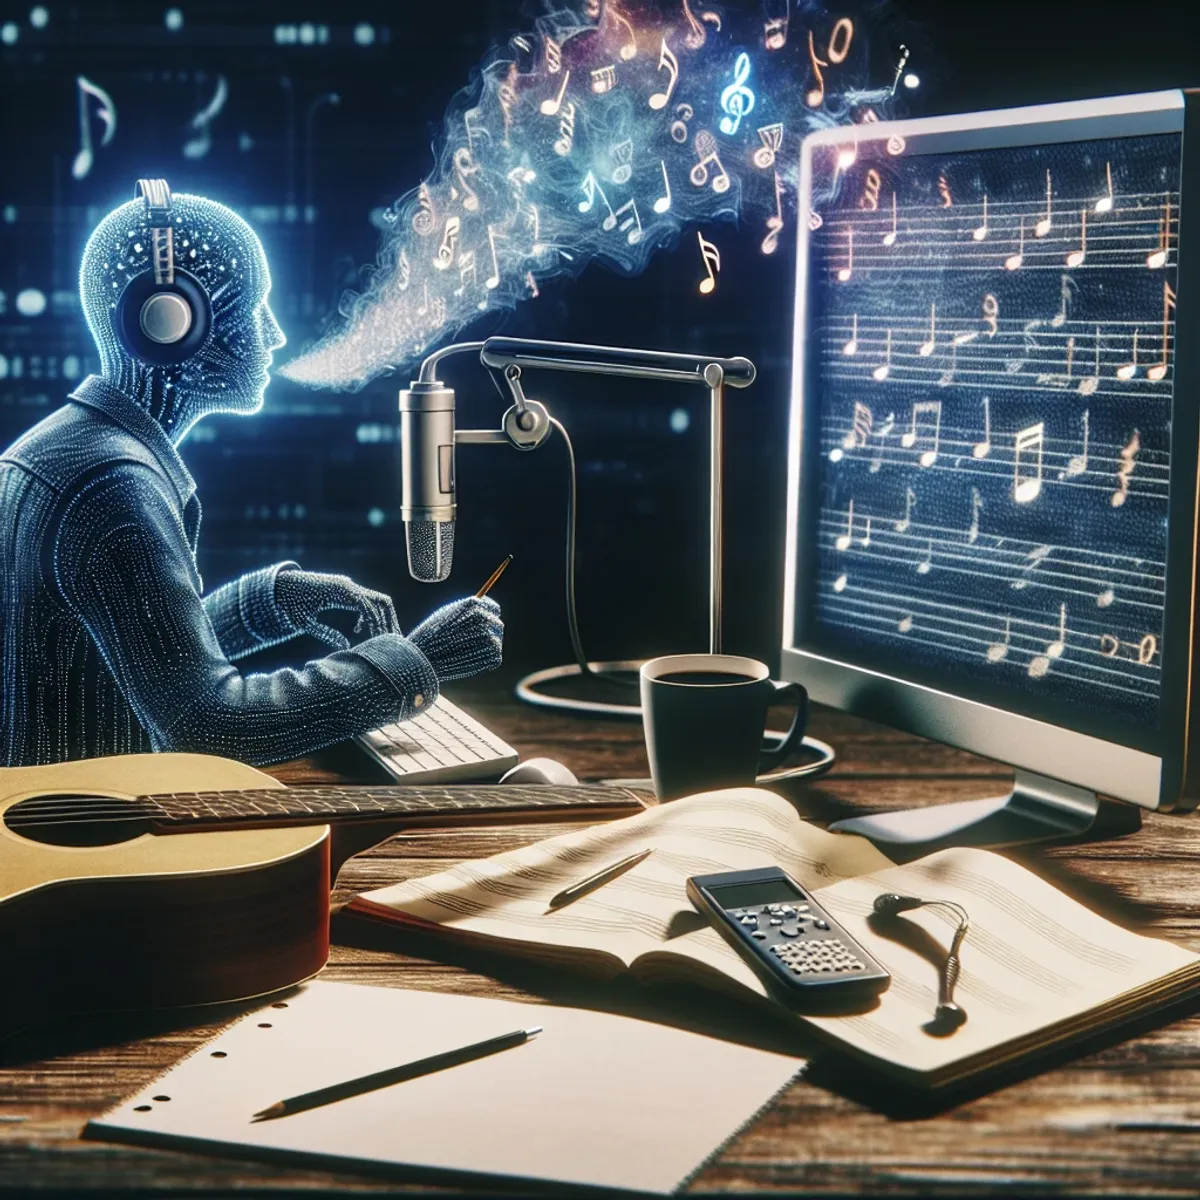 A musician sits at a computer with musical symbols on the screen, a notepad of handwritten lyrics, and a translucent AI cloud whispering words.